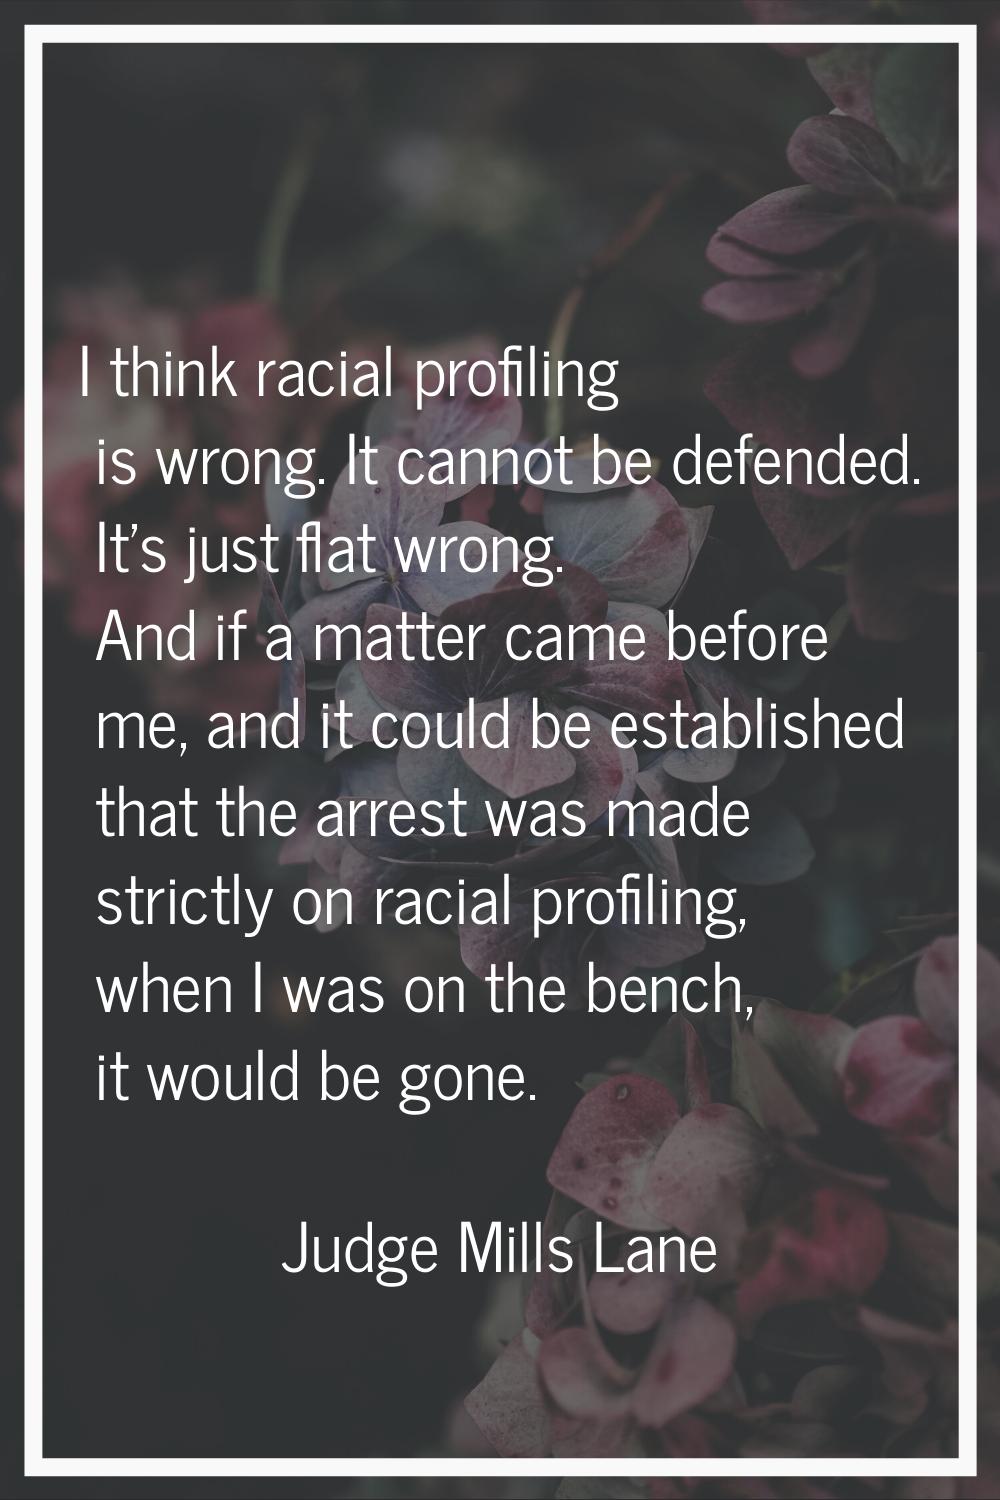 I think racial profiling is wrong. It cannot be defended. It's just flat wrong. And if a matter cam